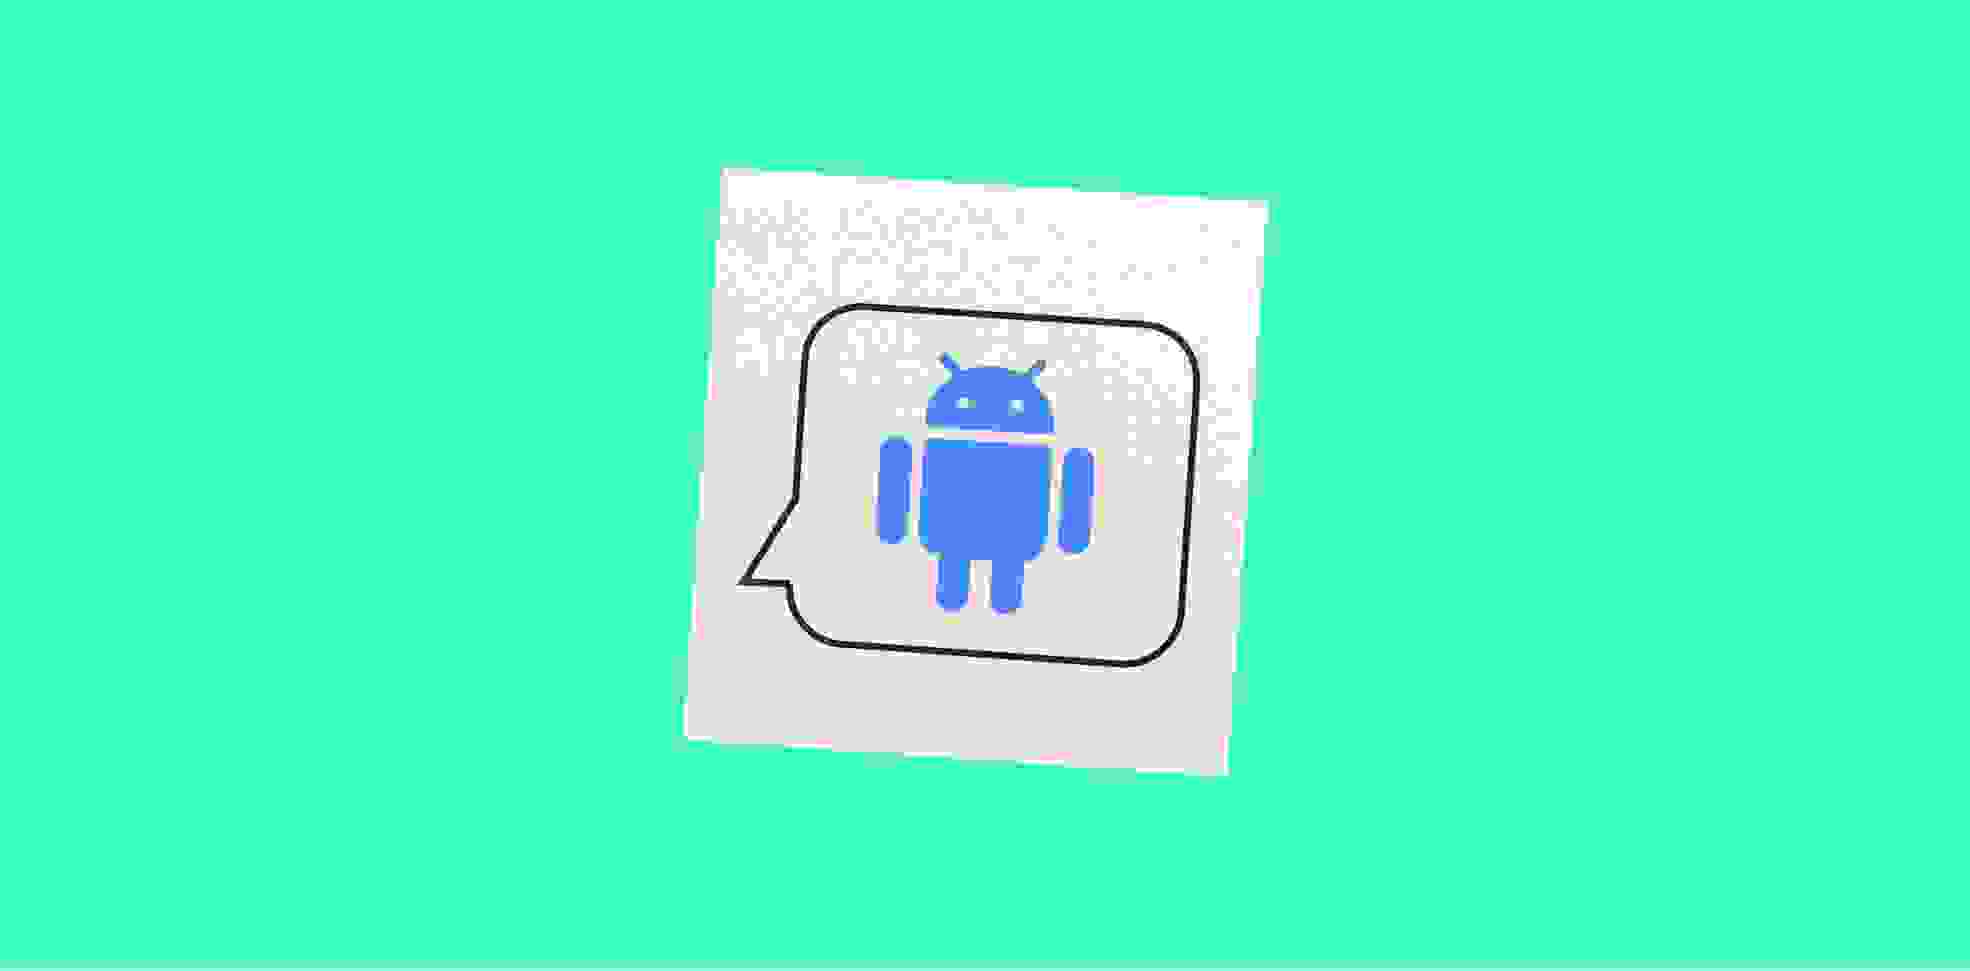 a symbol of Android on a sheet of paper